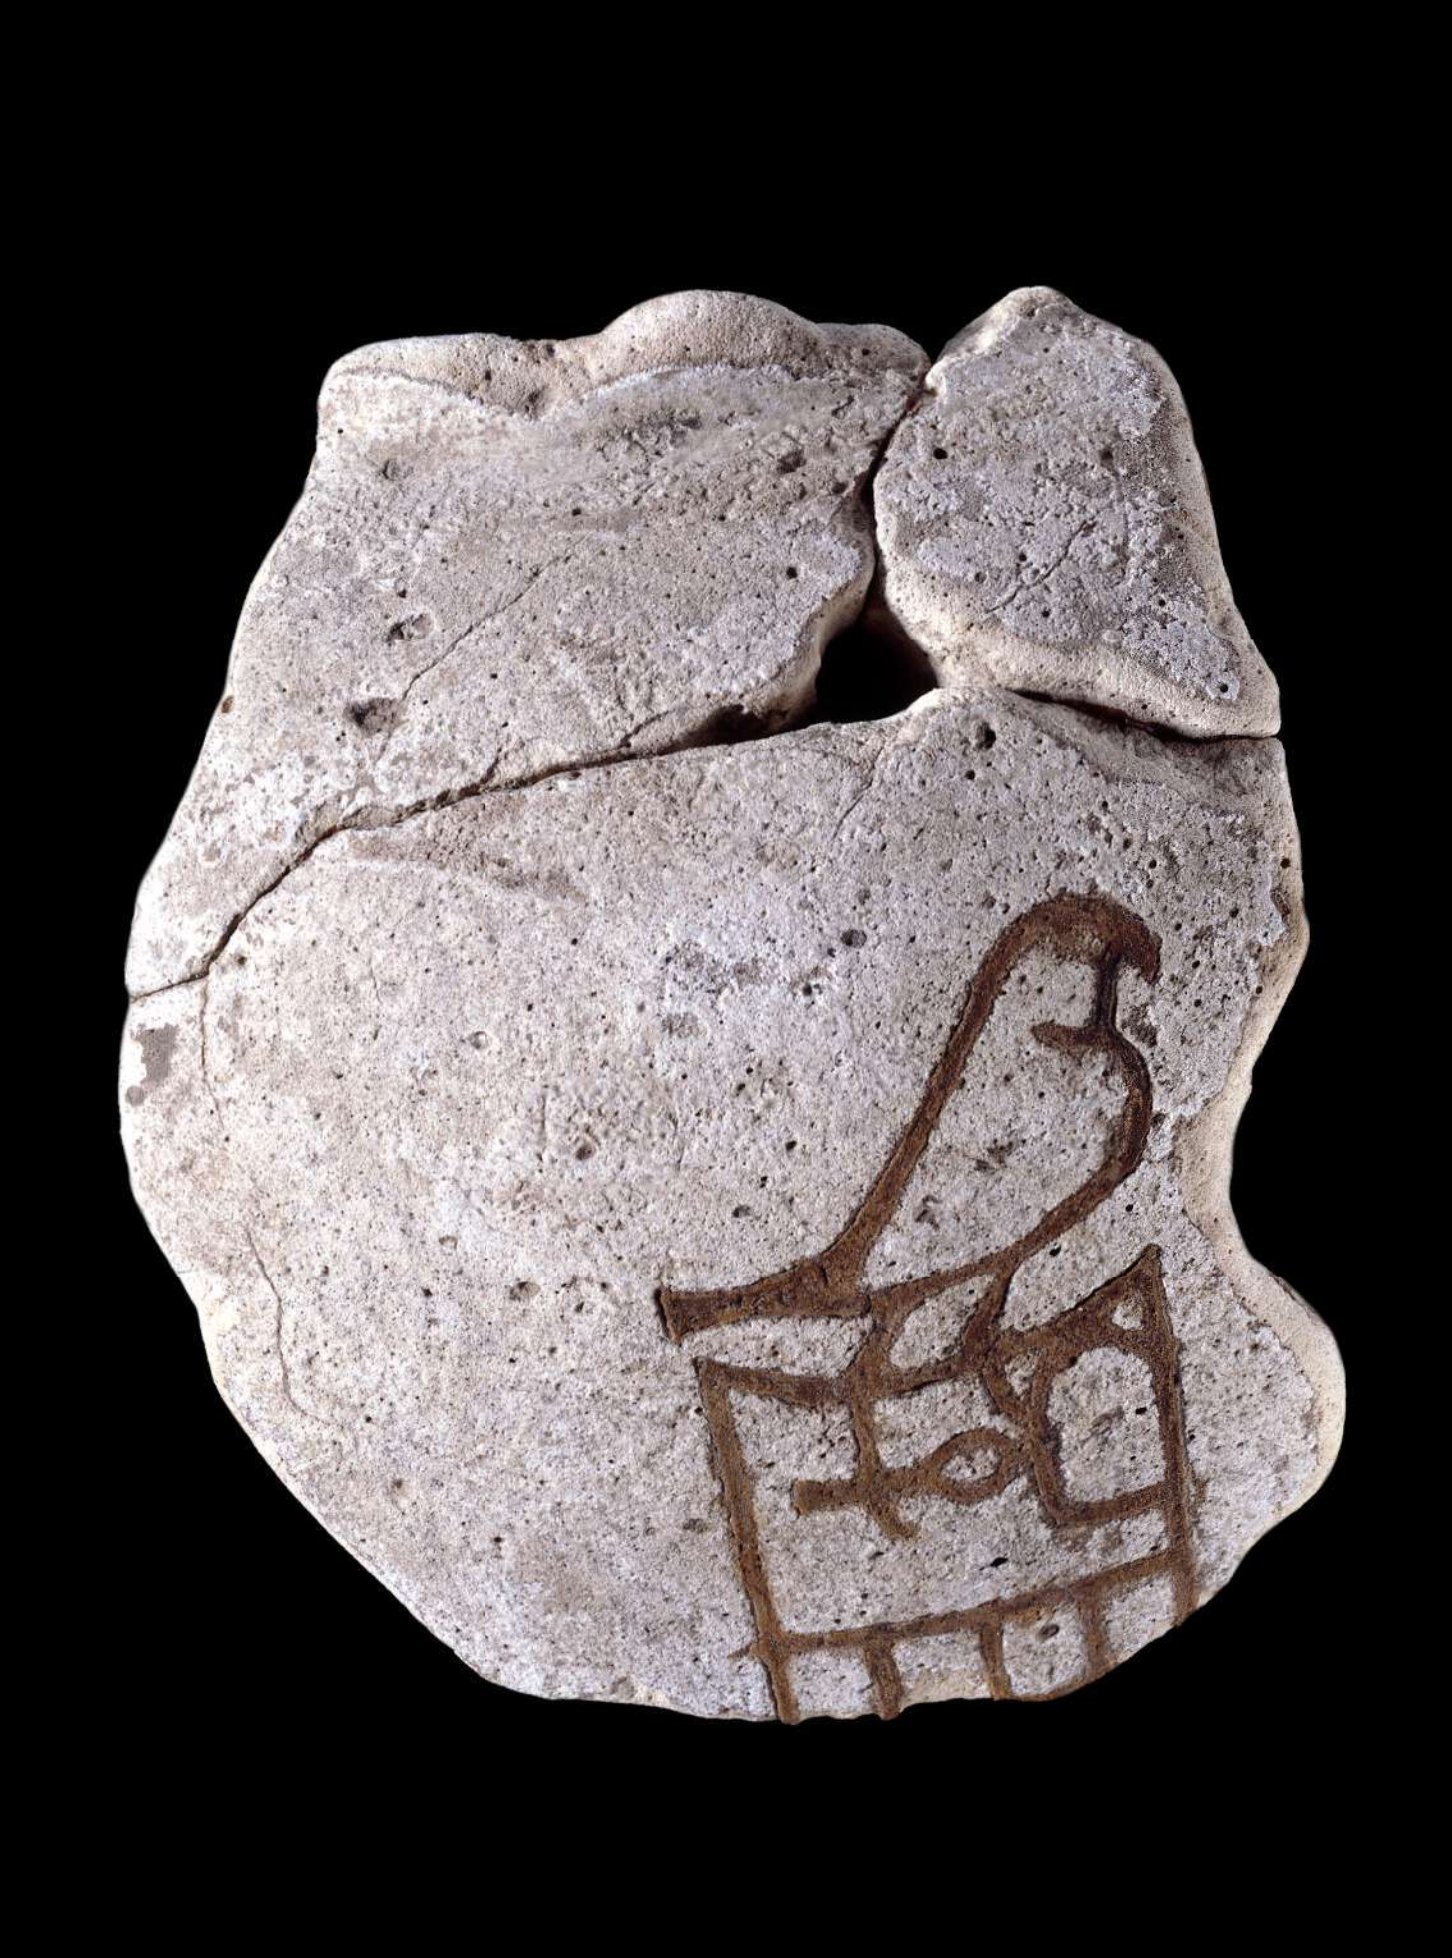 The image shows an ancient artifact that is a small piece of pottery. The pottery is a light beige color with a darker brown design on it. The design is of a falcon standing on a platform. The pottery is cracked and chipped in several places, indicating its age and fragility. The background is black, making the pottery stand out.